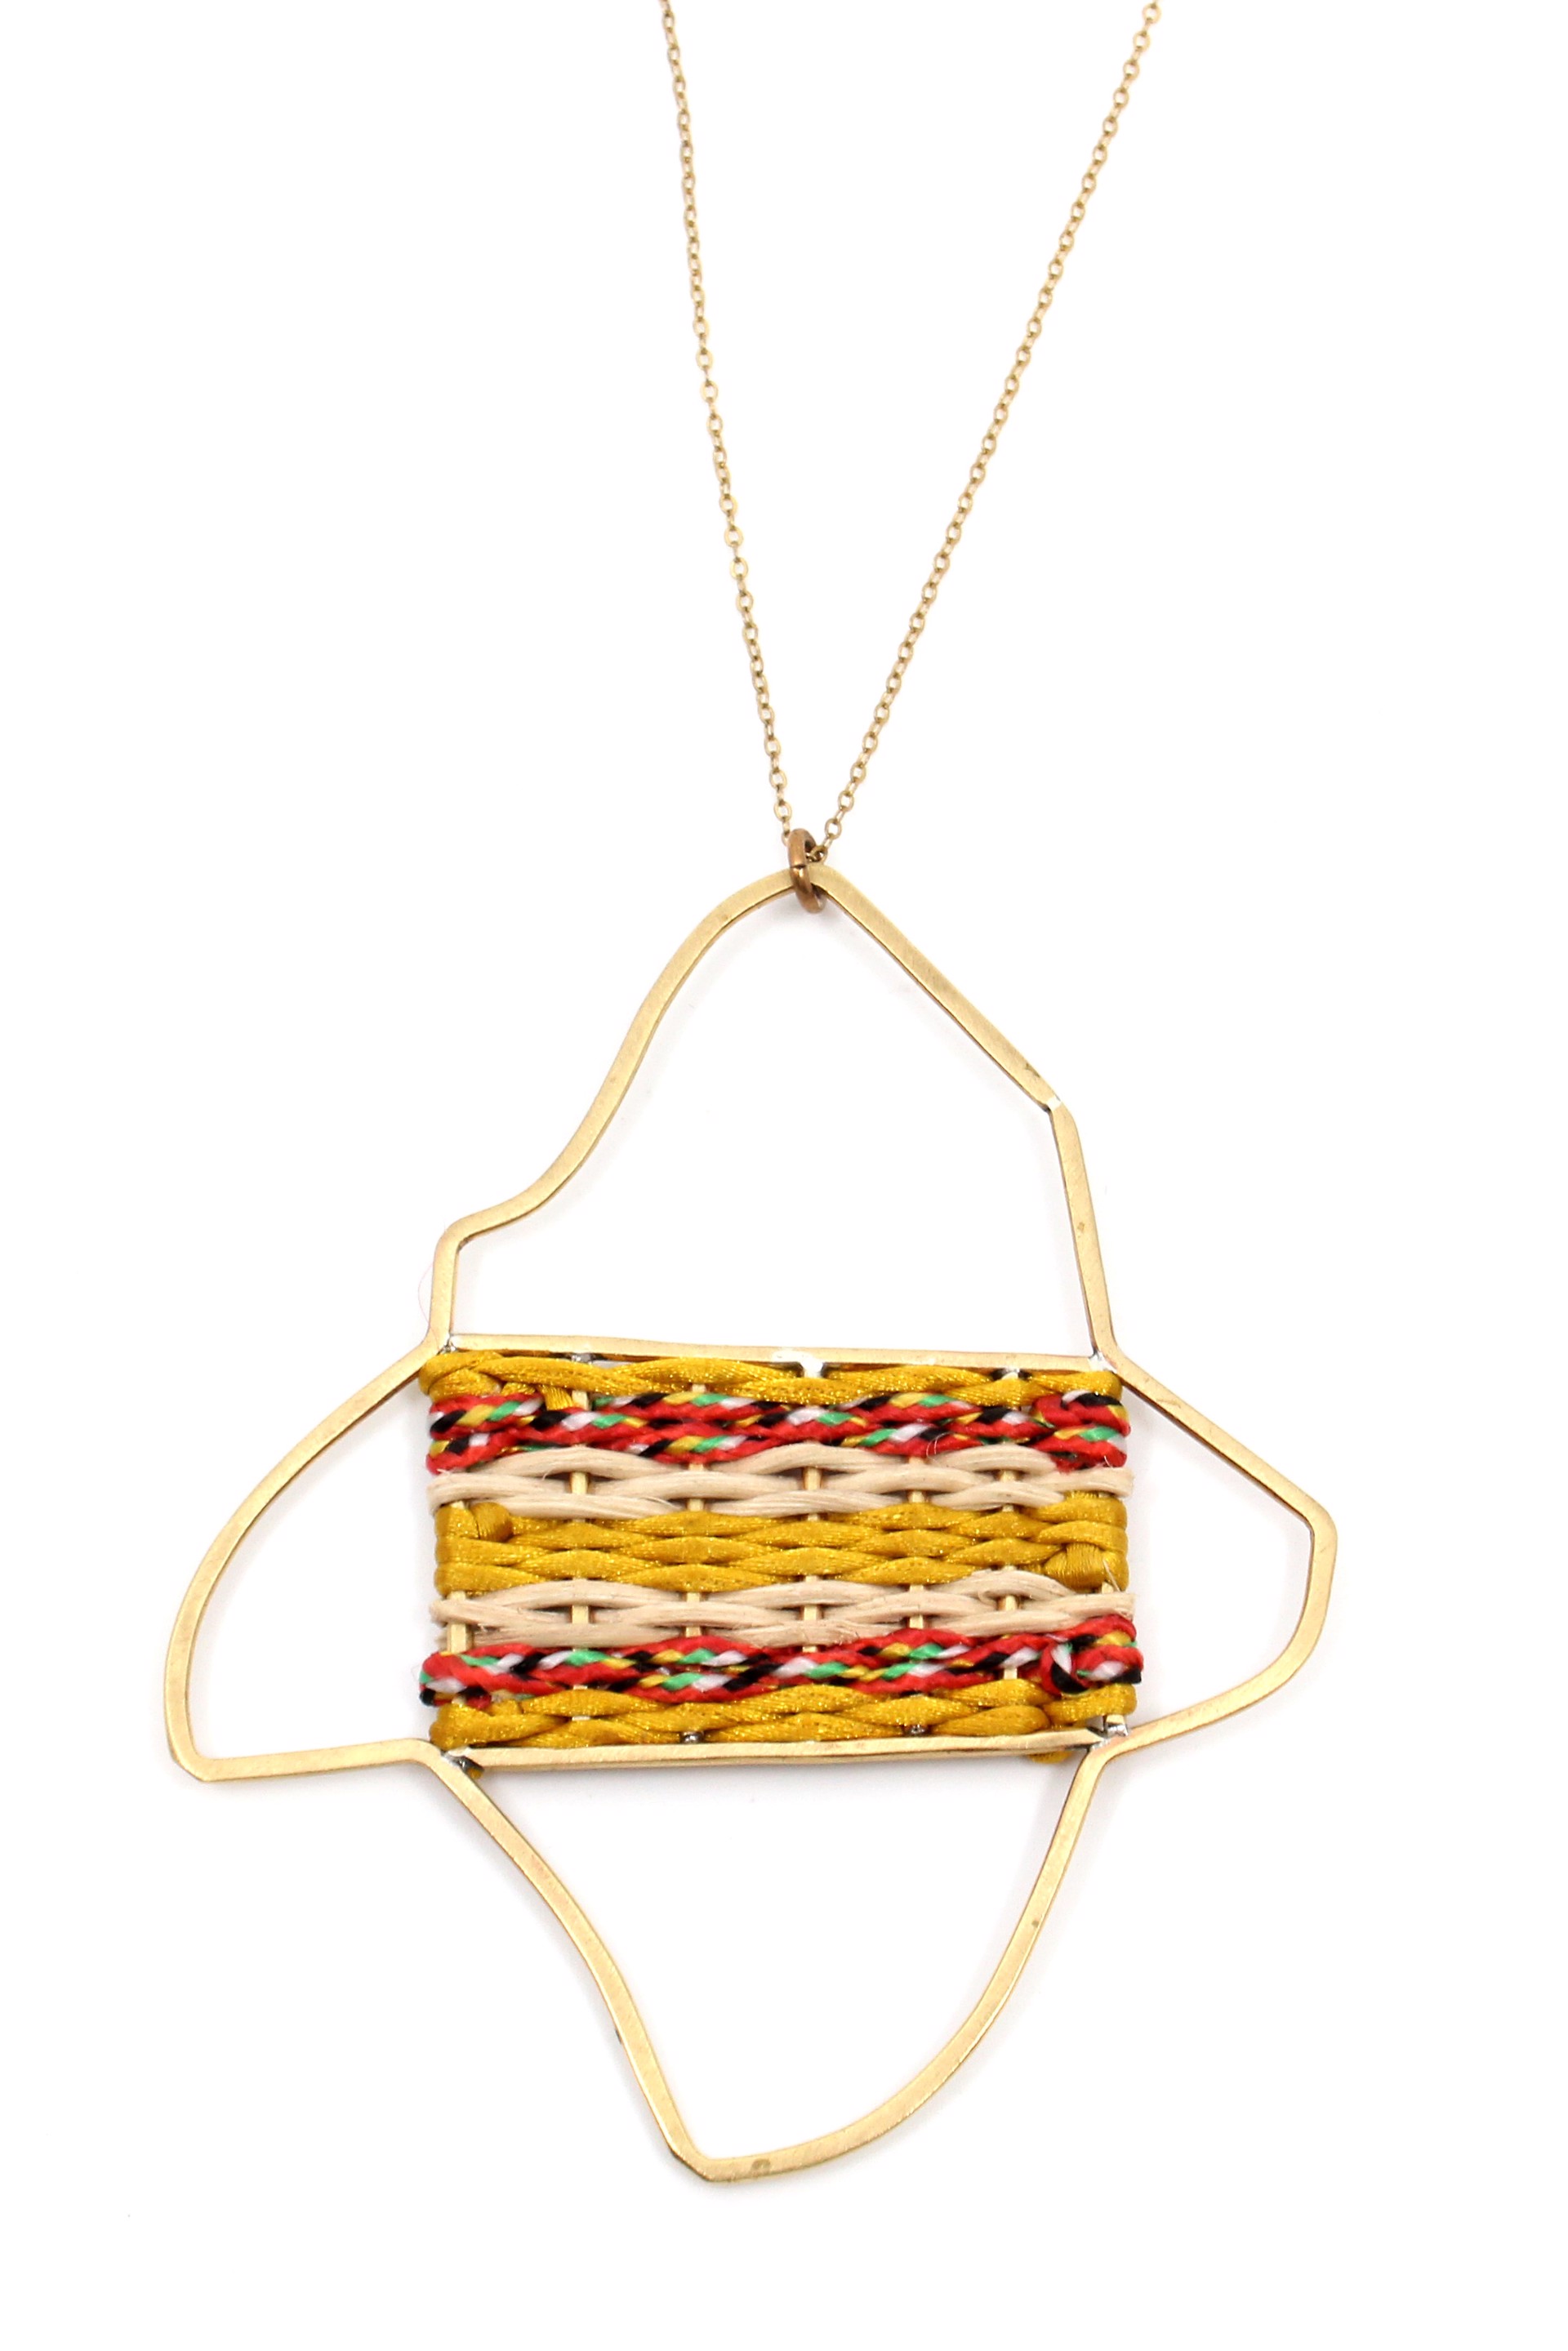 Abstract Field Necklace by Flag Mountain Jewelry